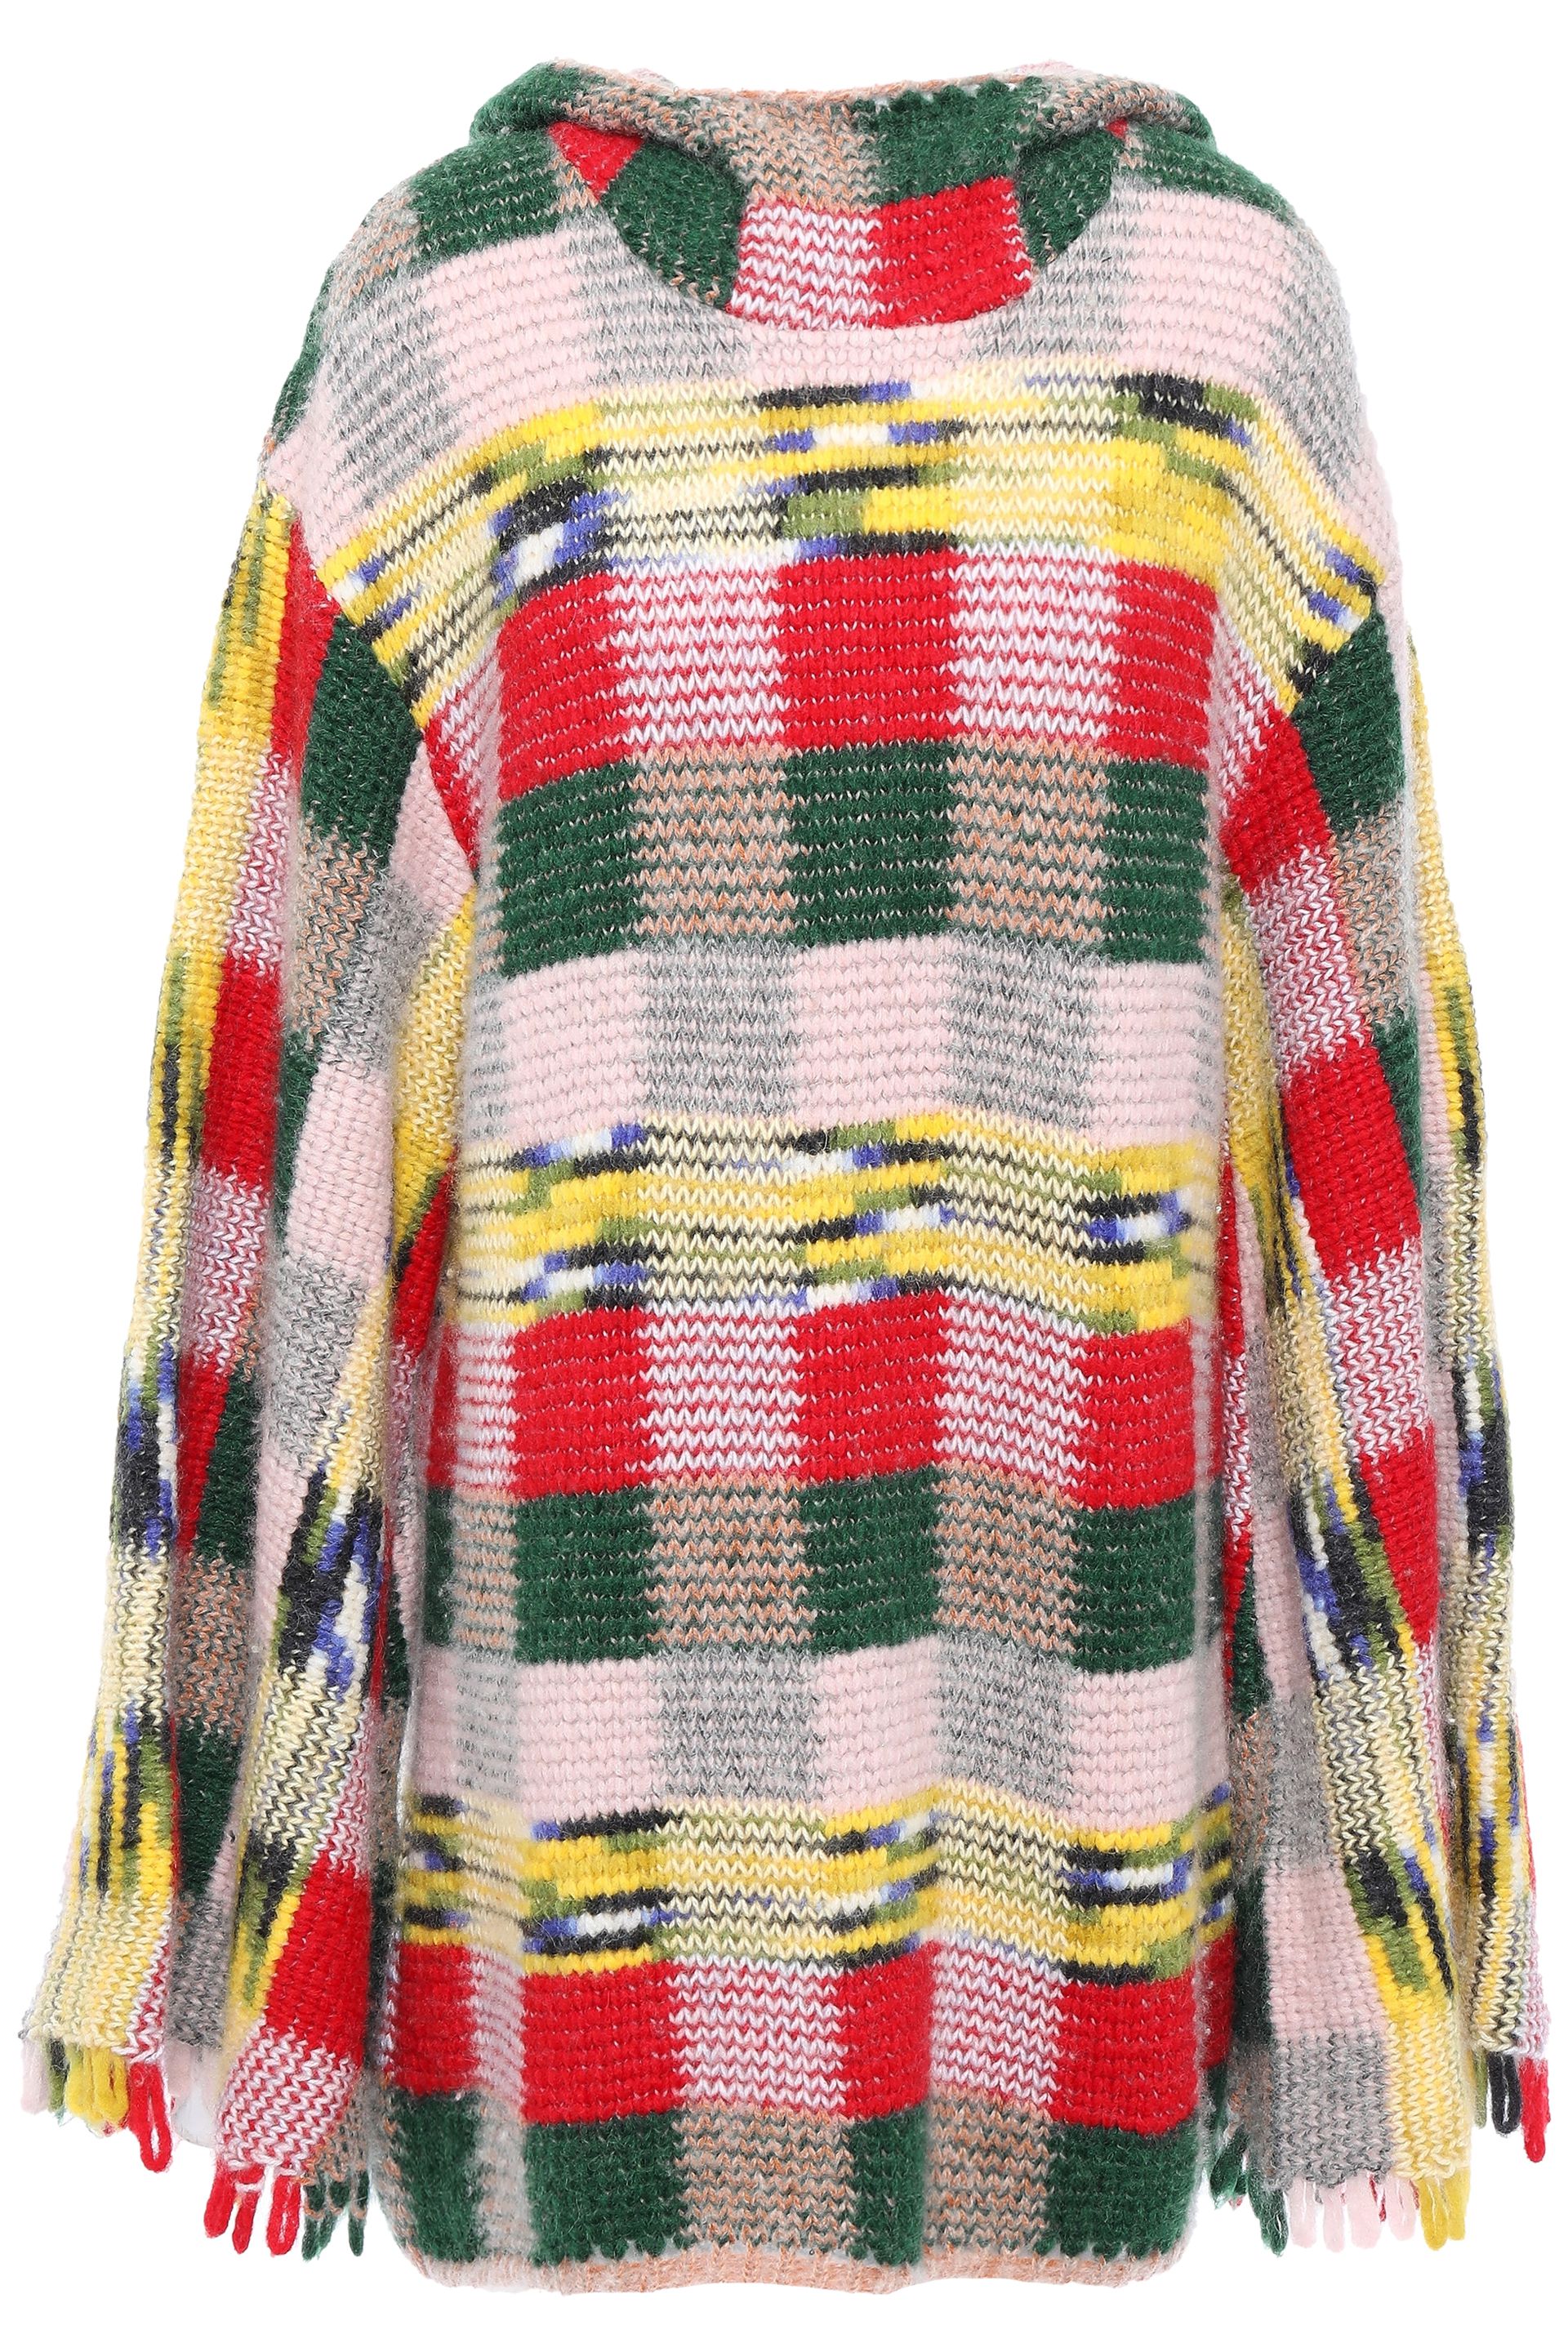 Missoni | Sale Up To 70% Off At THE OUTNET